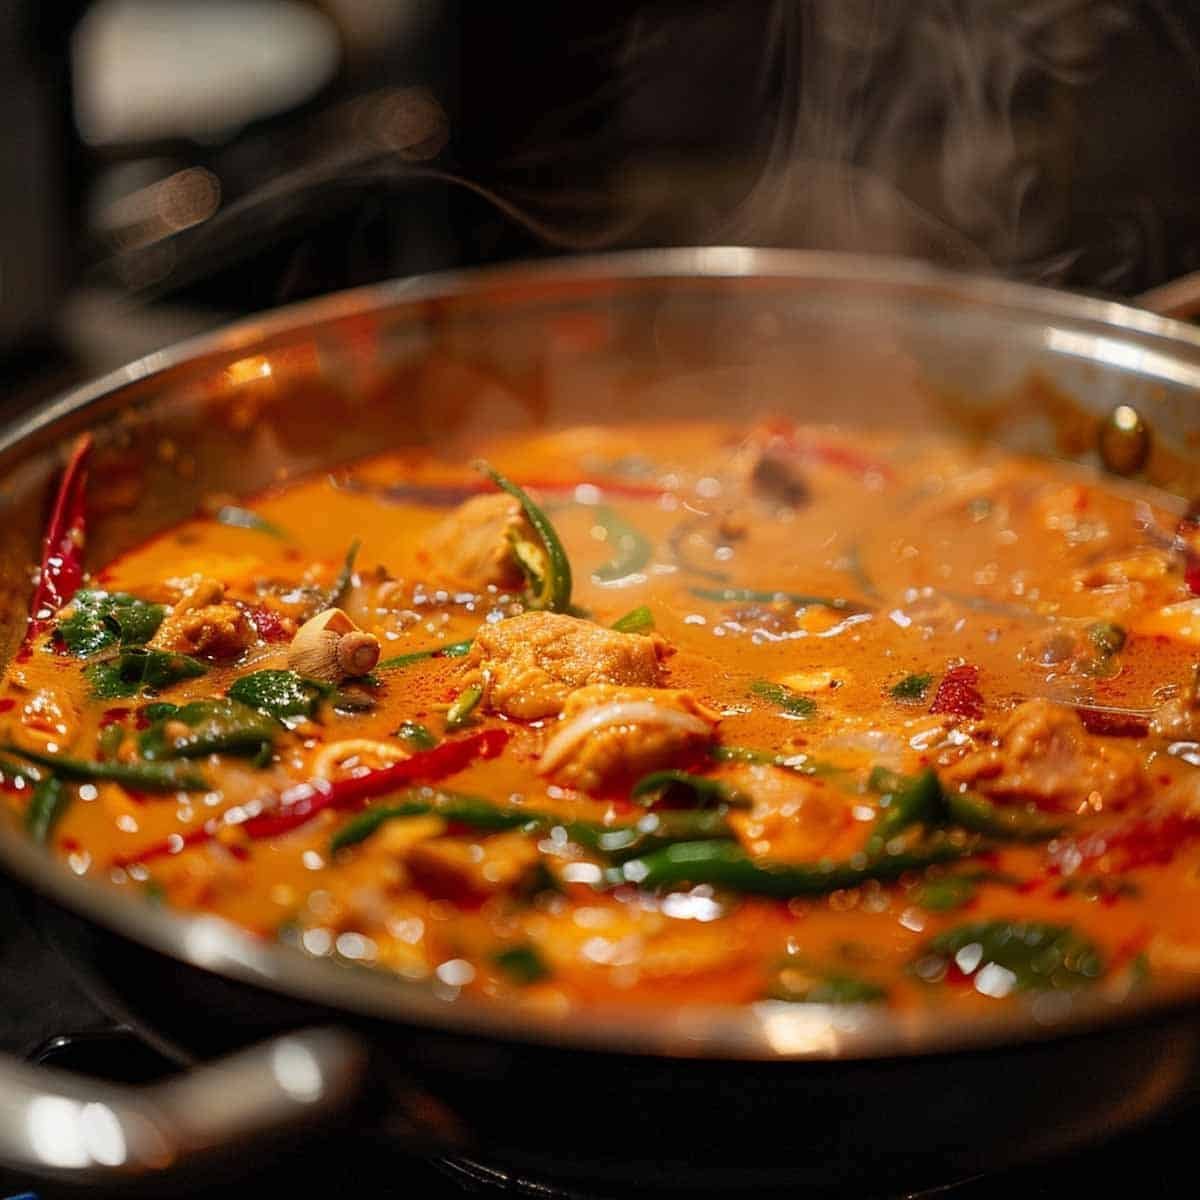 Red curry simmering in a pot, with rich, vibrant red sauce and fragrant steam rising